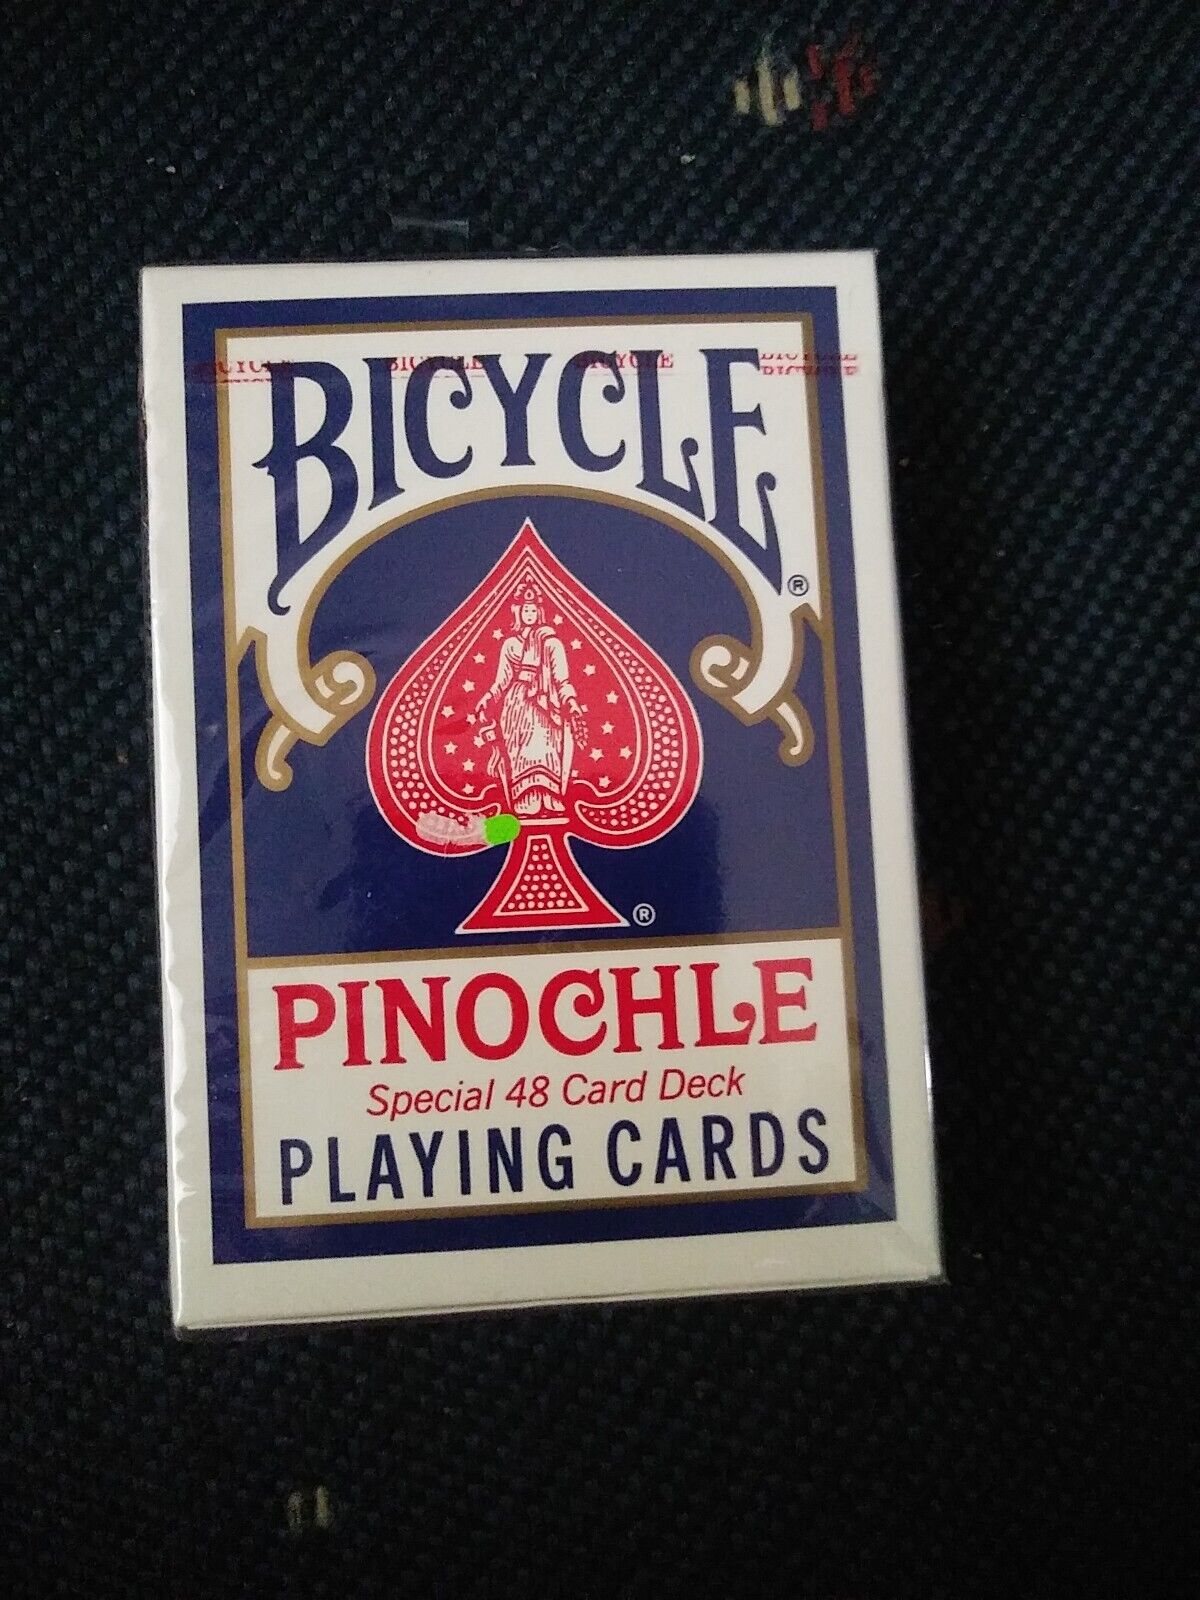 NEW NIP Bicycle Pinochle Special 48-Card Deck Blue Playing Cards